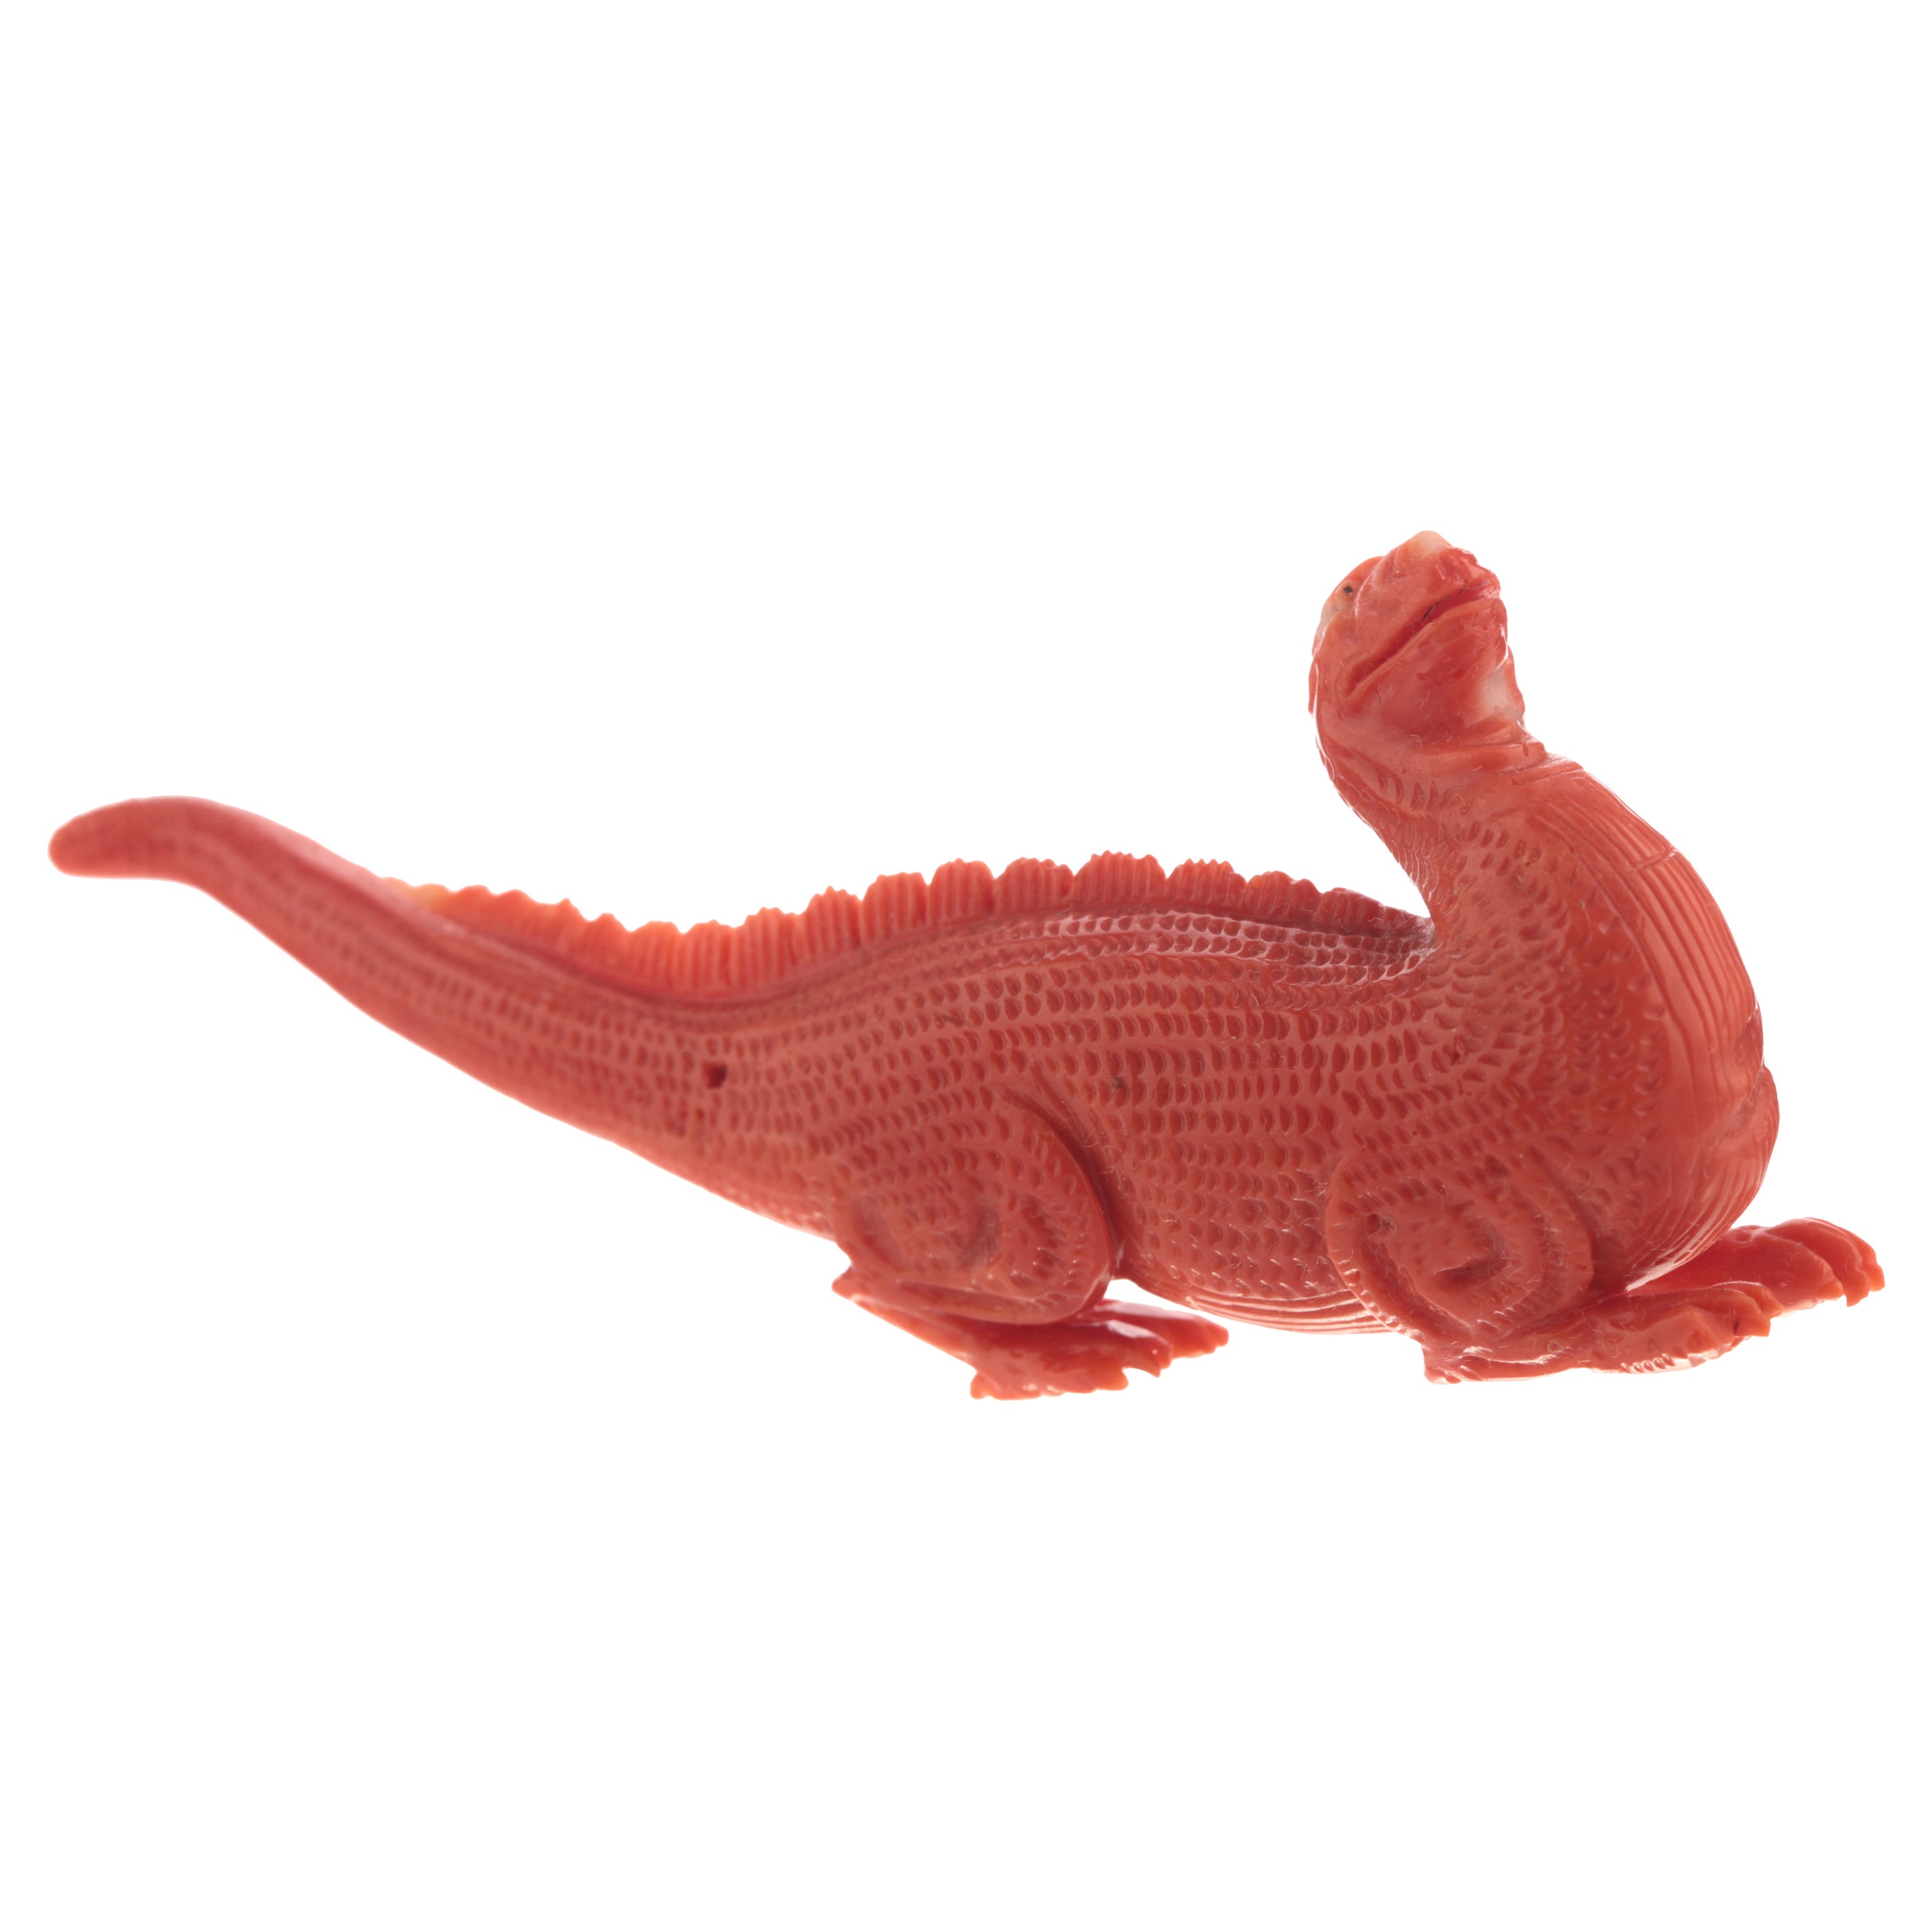 Natural Red Coral Animal Carved Dinosaur Figurine Asian Decorative Art Sculpture For Sale